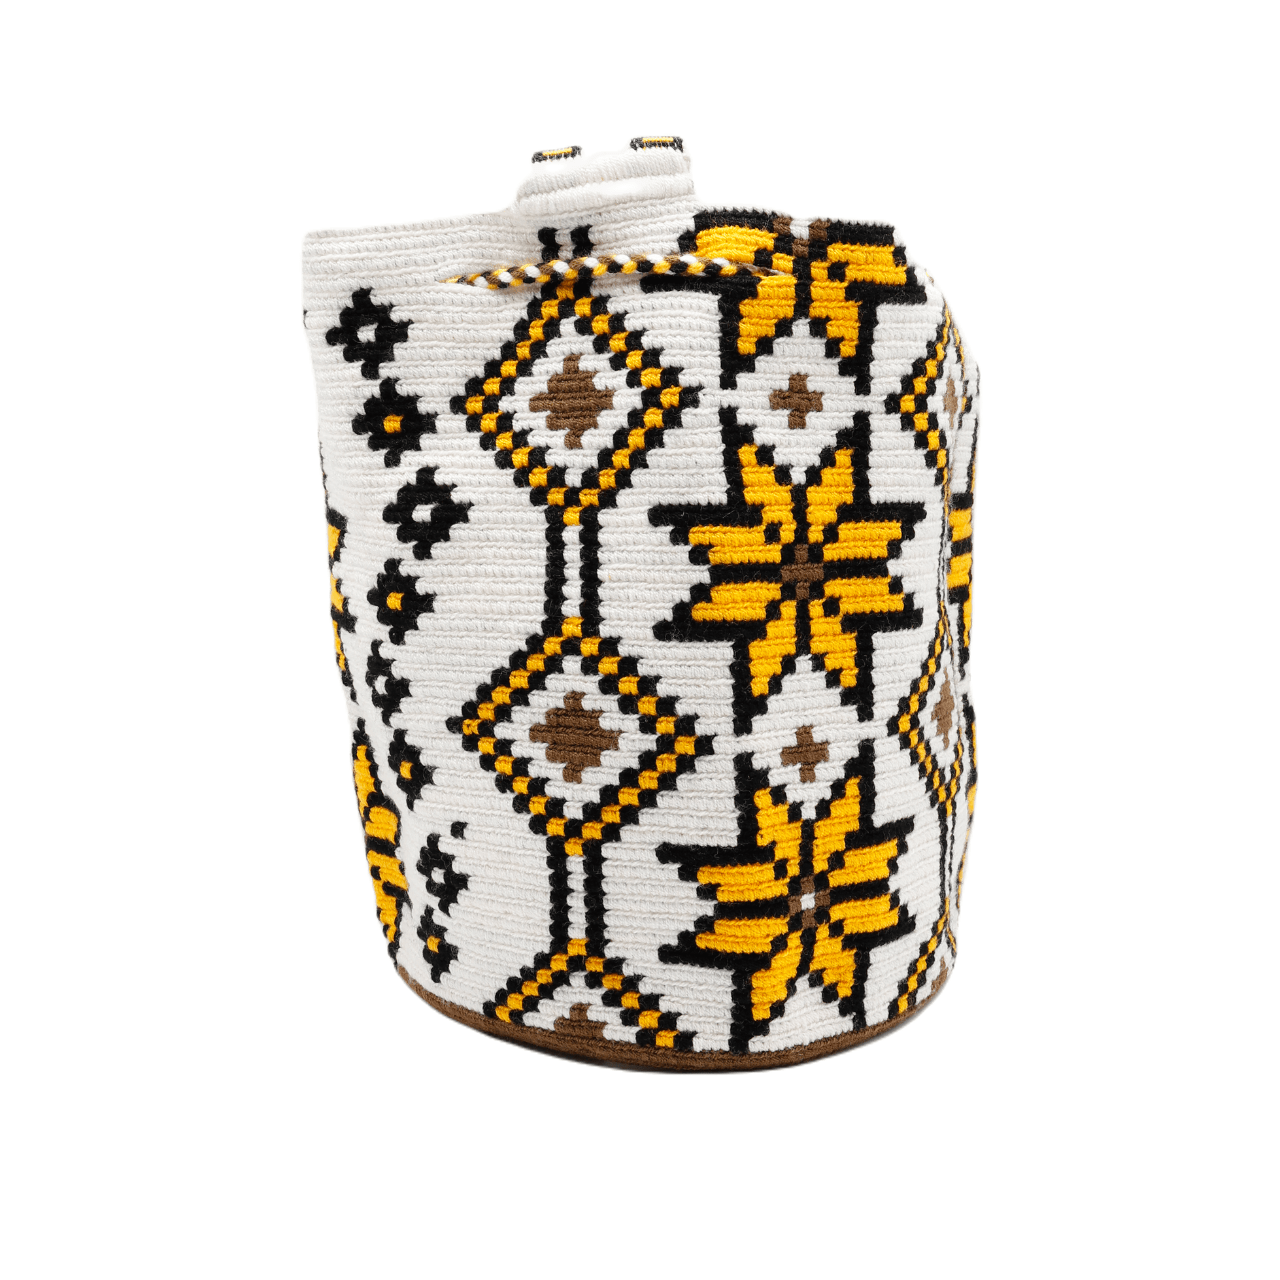 Experience the excellence of the Lau Wayuu Bag in white, yellow, and black shades. Meticulously crafted with top-quality materials, this bag showcases exceptional craftsmanship. Shop now for a stylish addition to your collection.